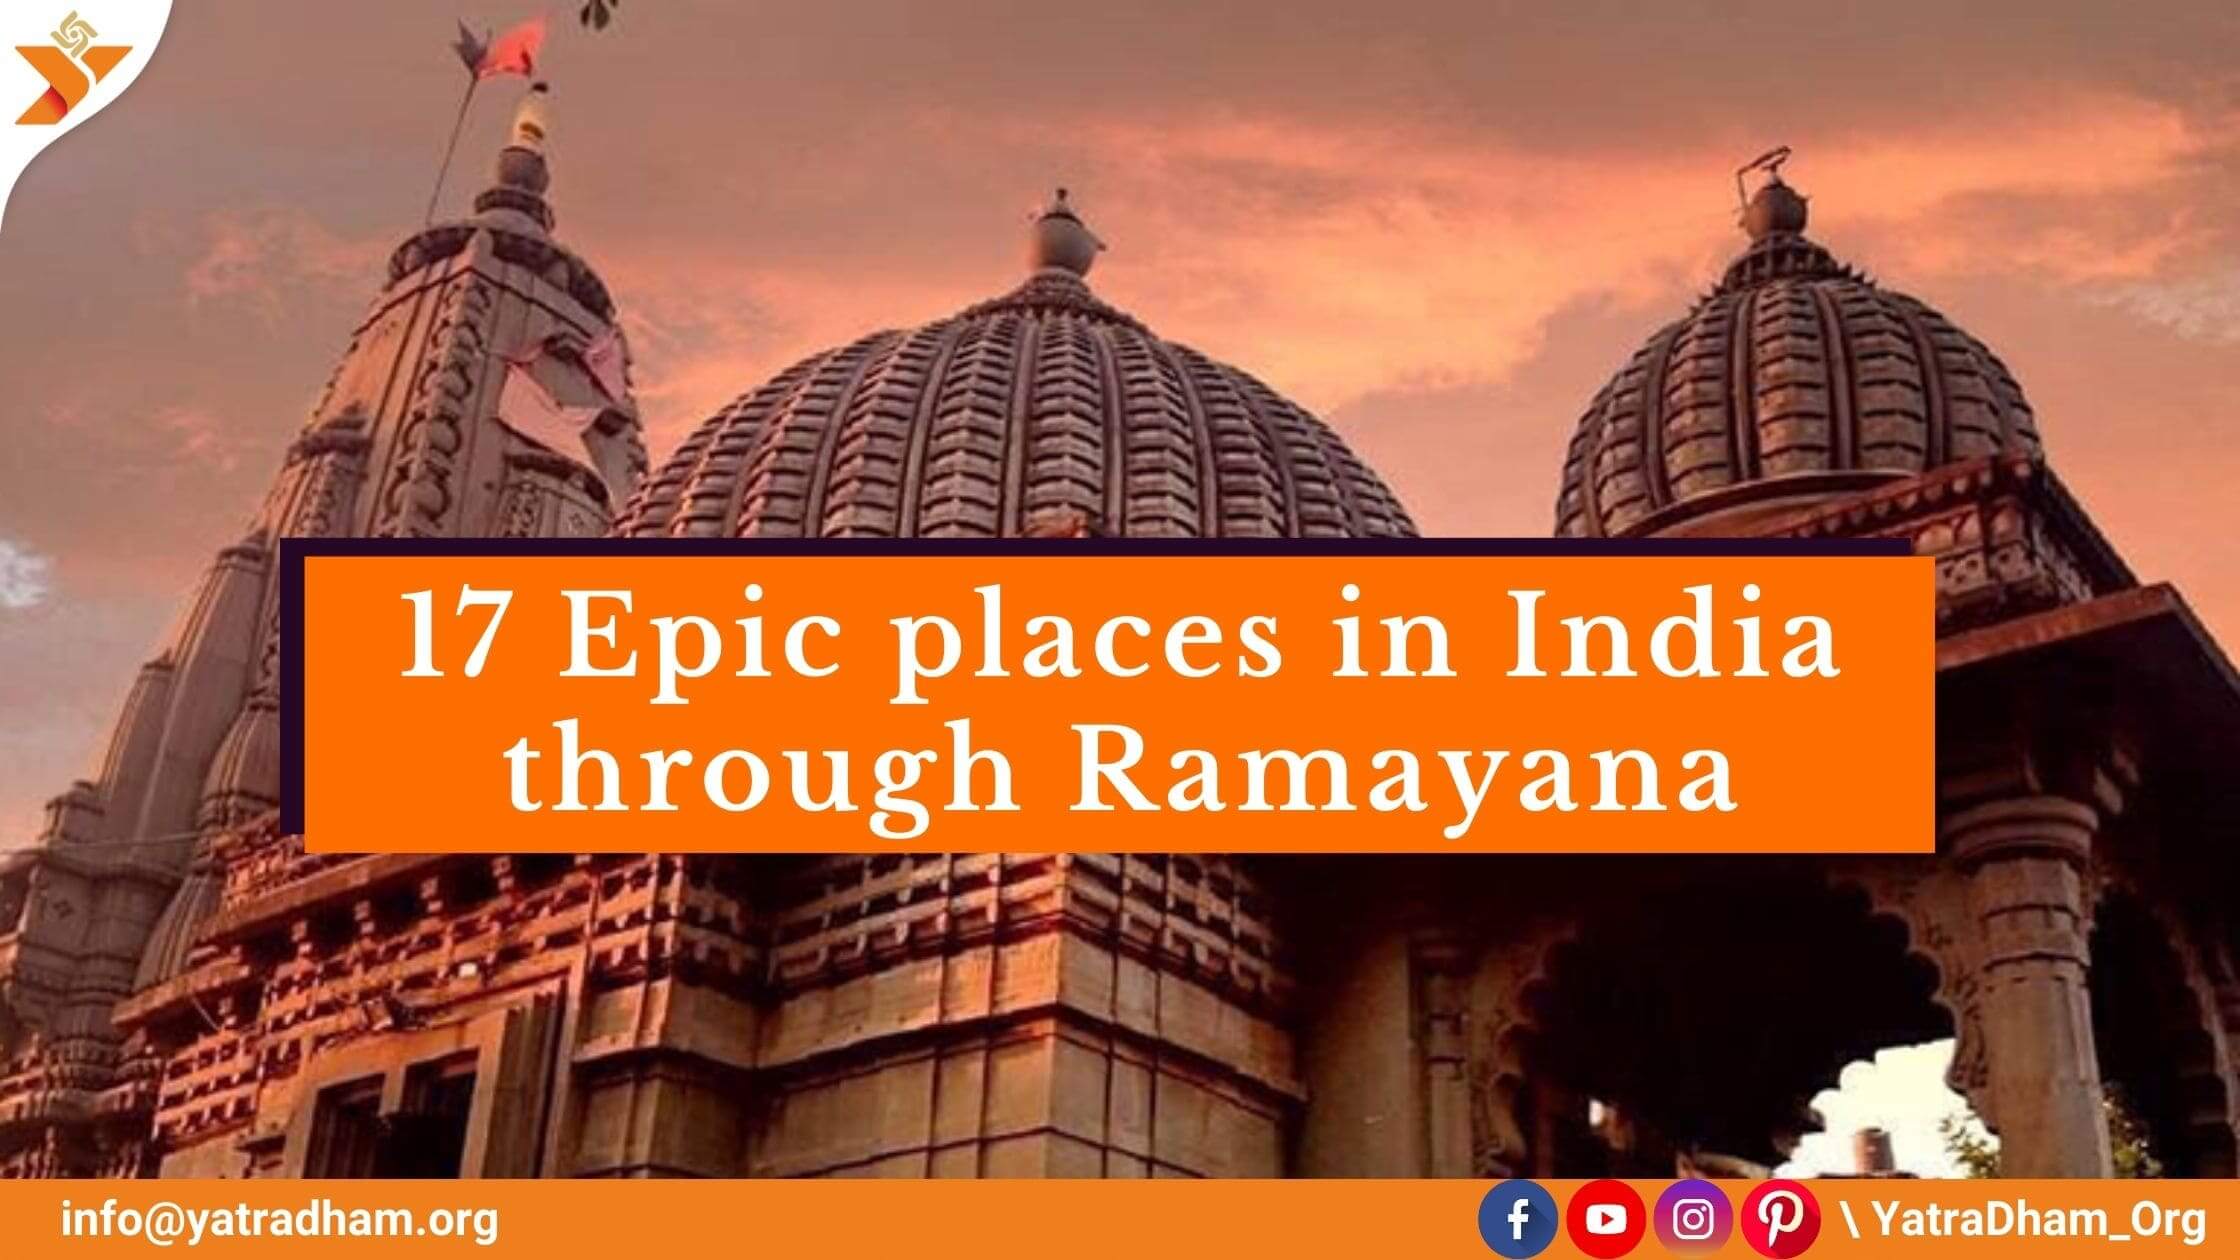 17 Epic places in India through Ramayana